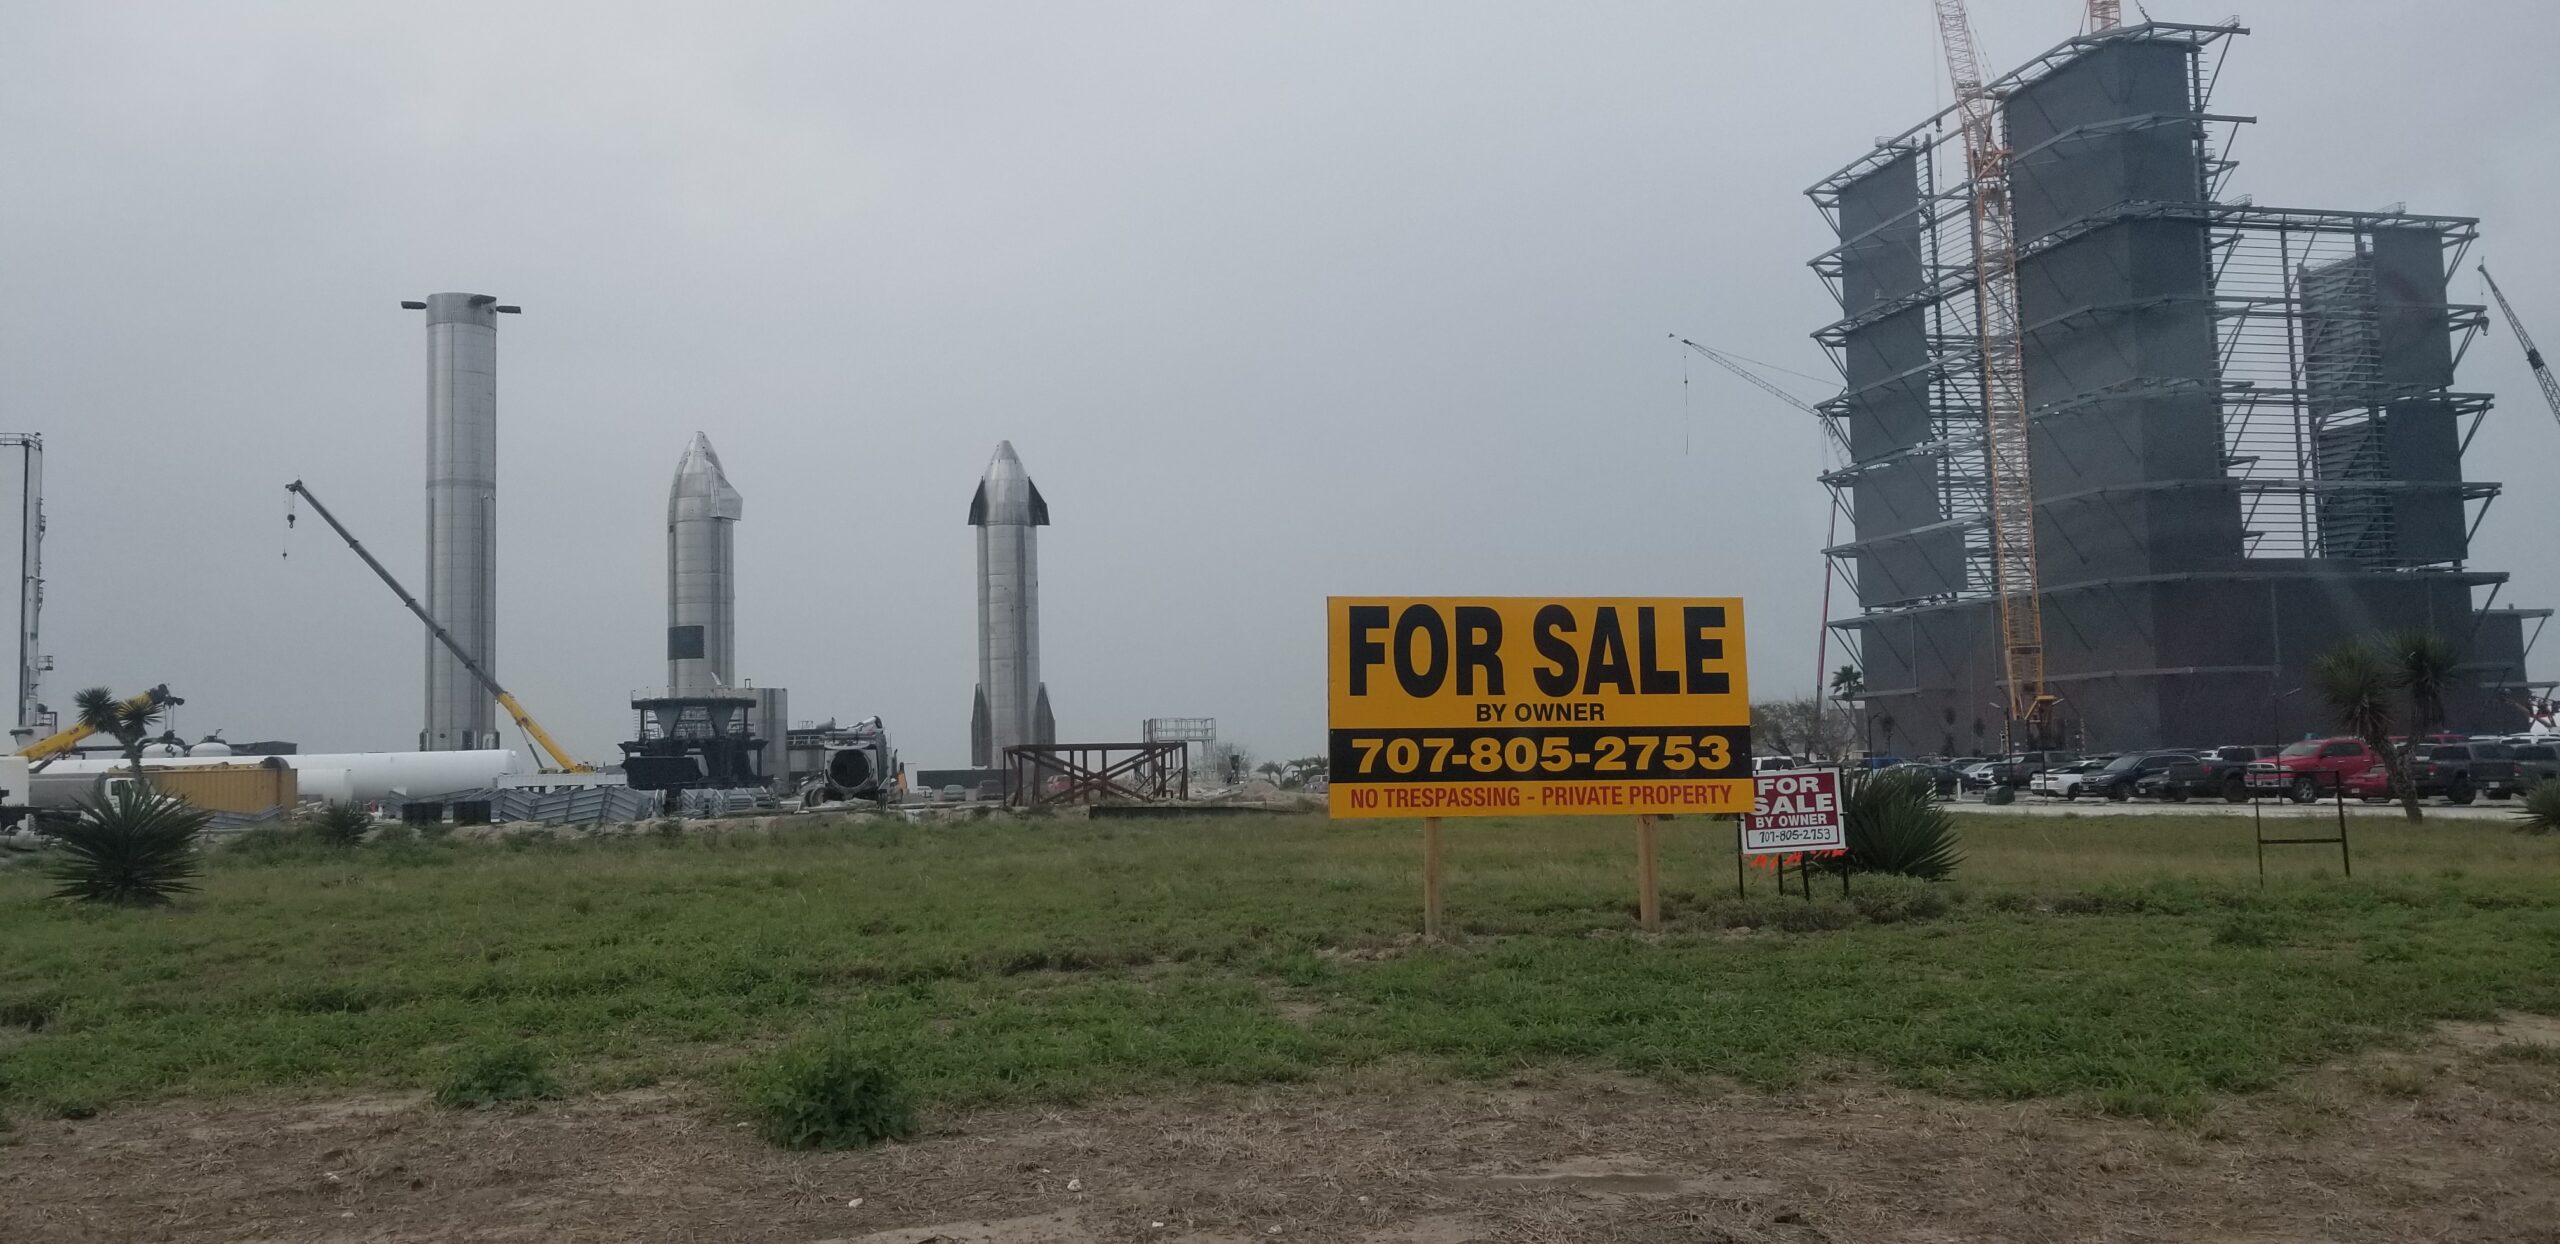 SpaceXOpportunity